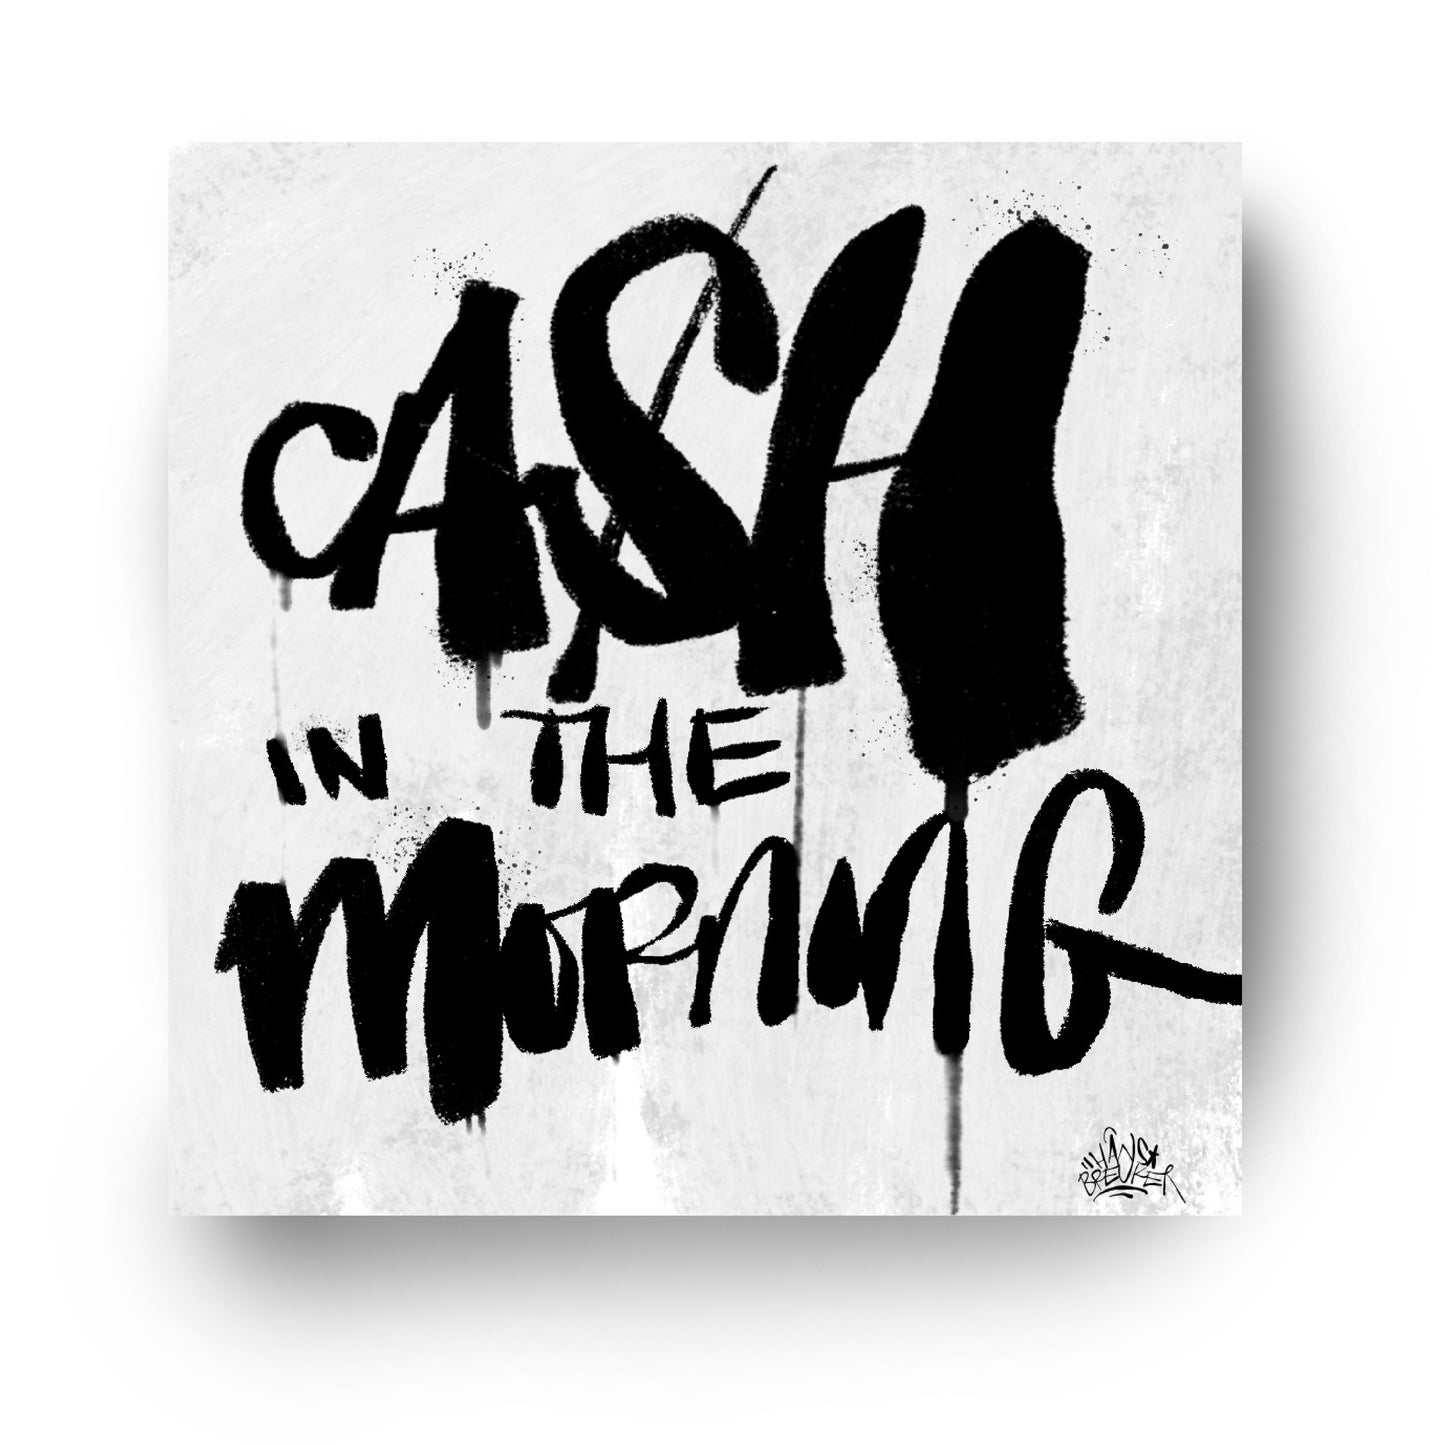 Cash in the morning baby